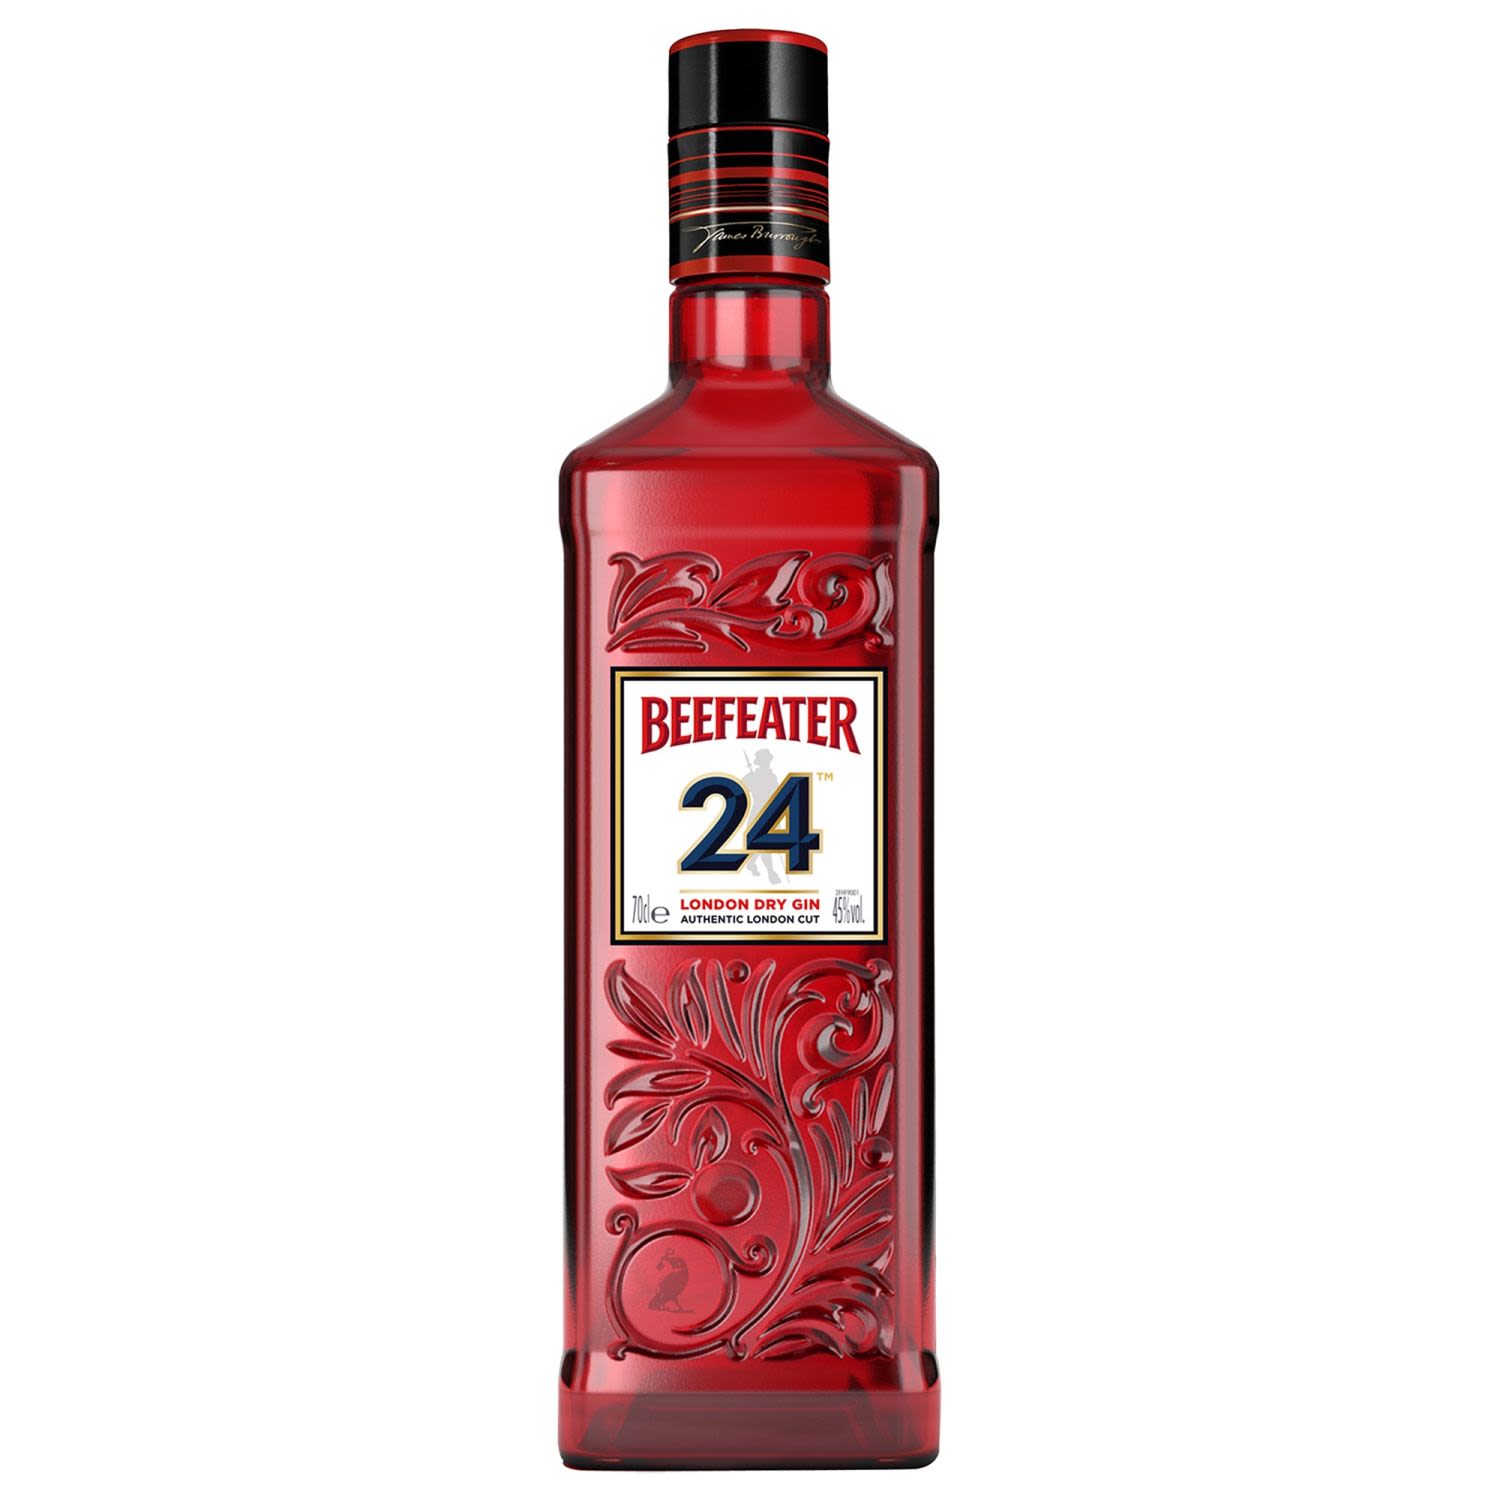 Beefeater 24 London Dry Gin 700mL Bottle